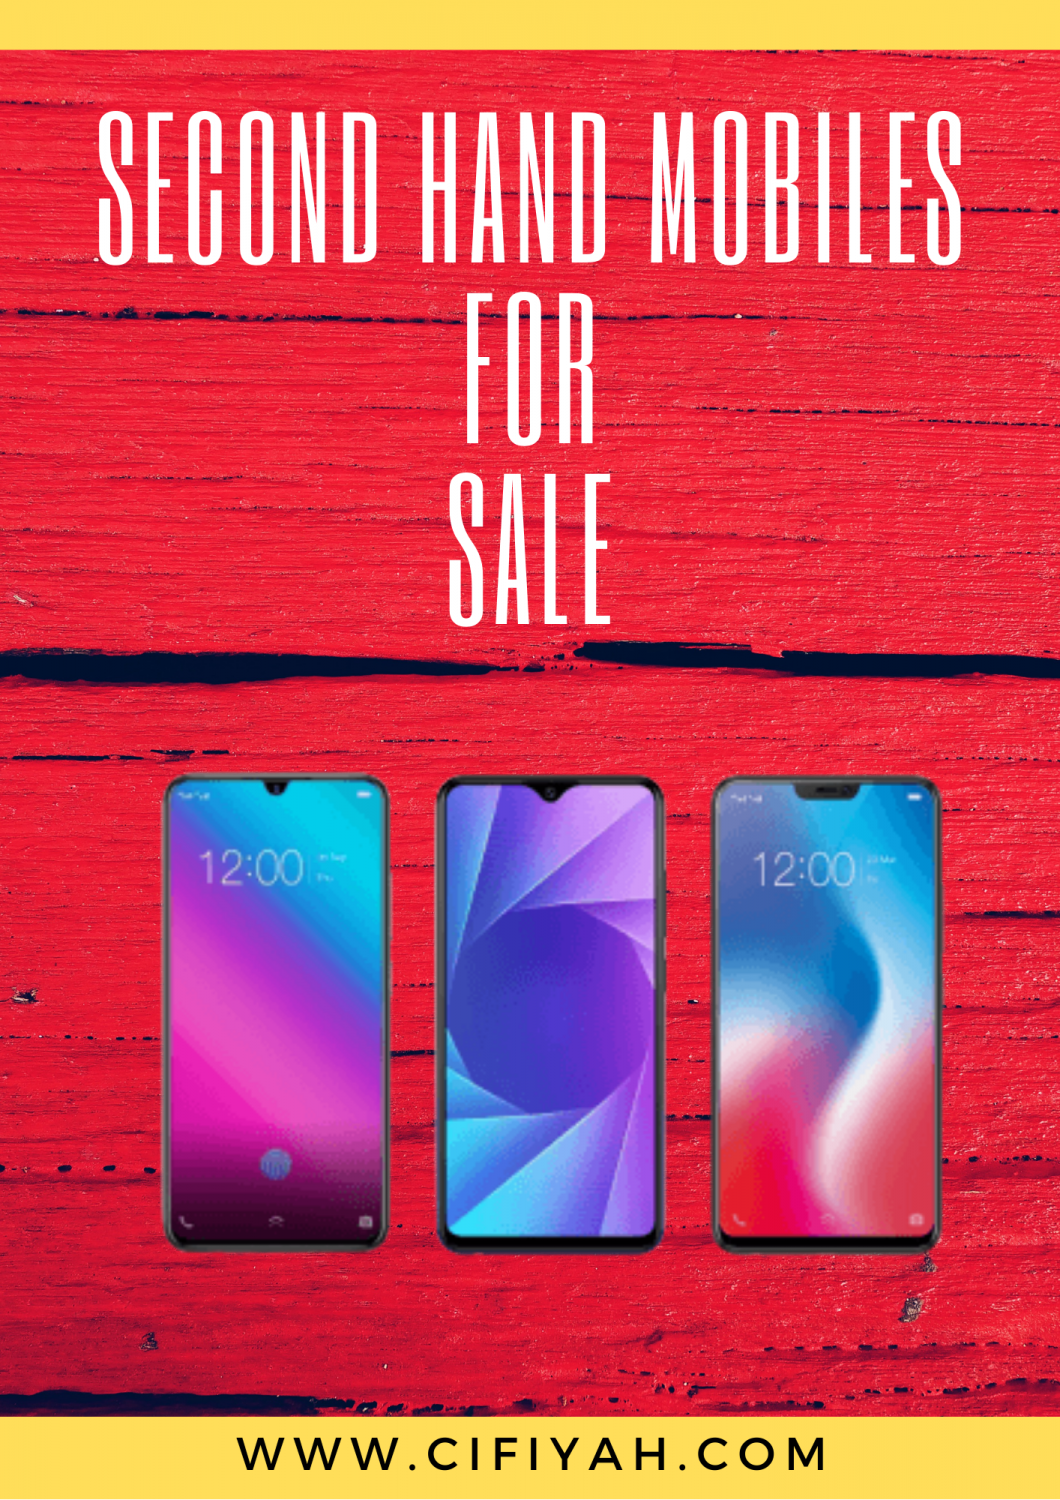 second hand mobiles for sale on cifiyah.com